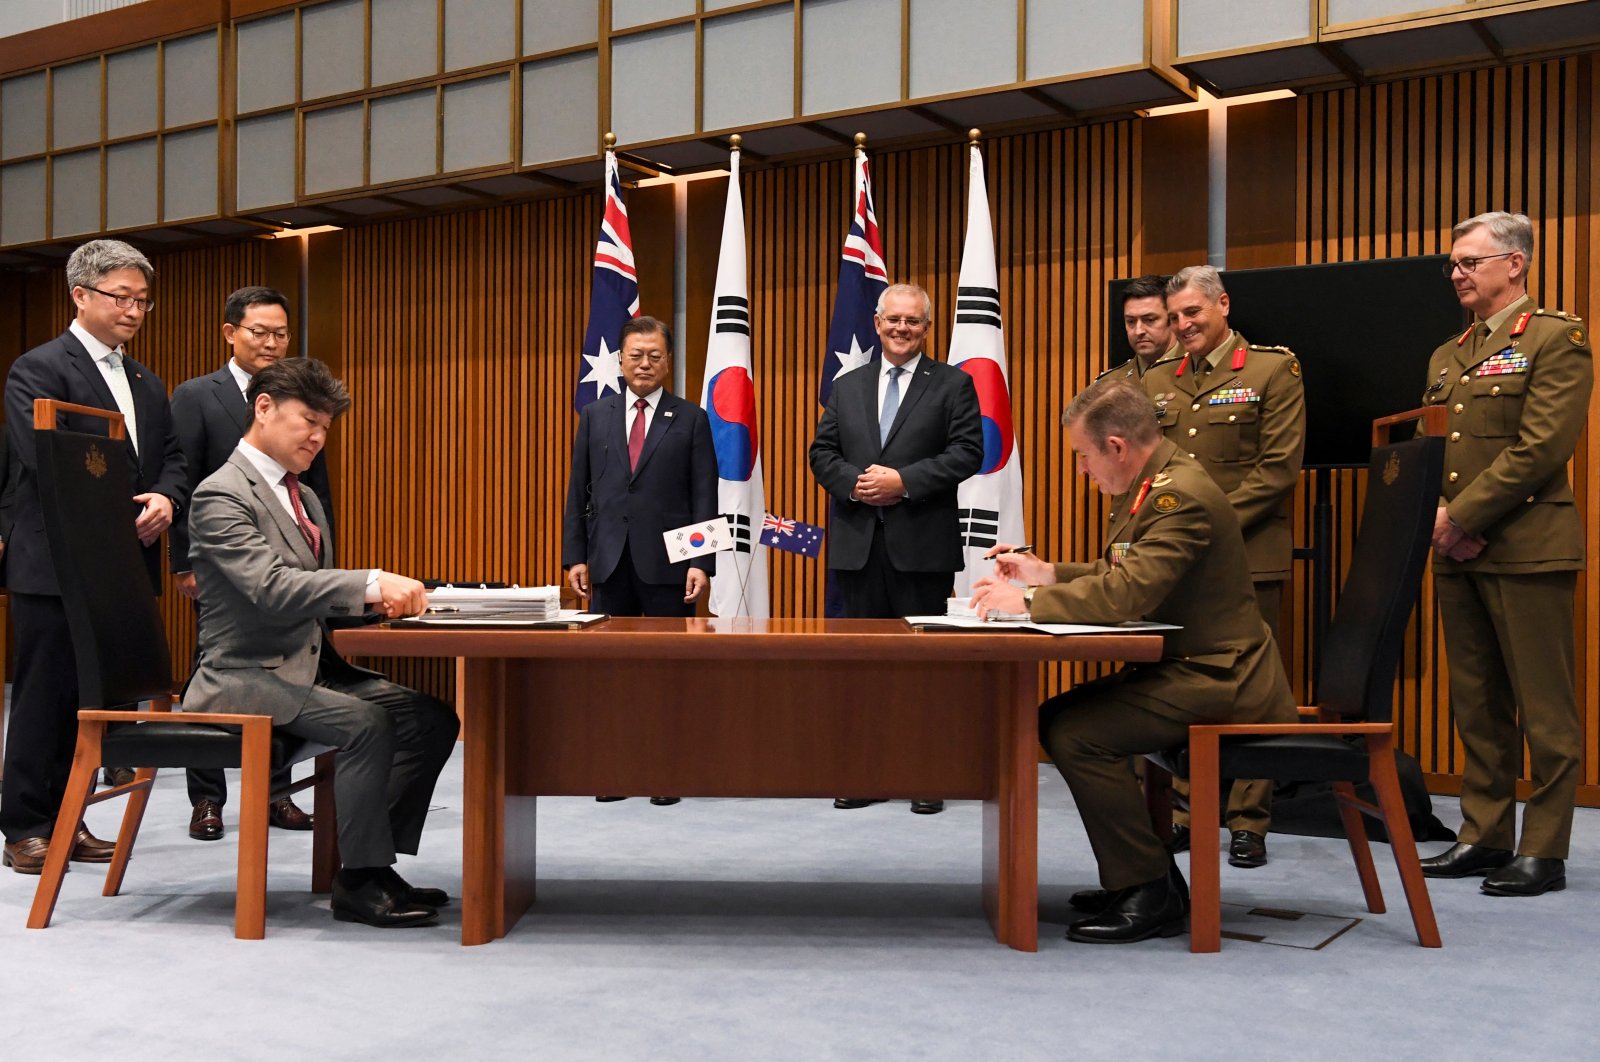 Australian Prime Minister Scott Morrison and South Korean President Moon Jae-in witness representatives of Hanwha Group and members of the Australian Defence Force during a signing ceremony at Parliament House, in Canberra, Australia, Dec. 13, 2021. (Reuters Photo)